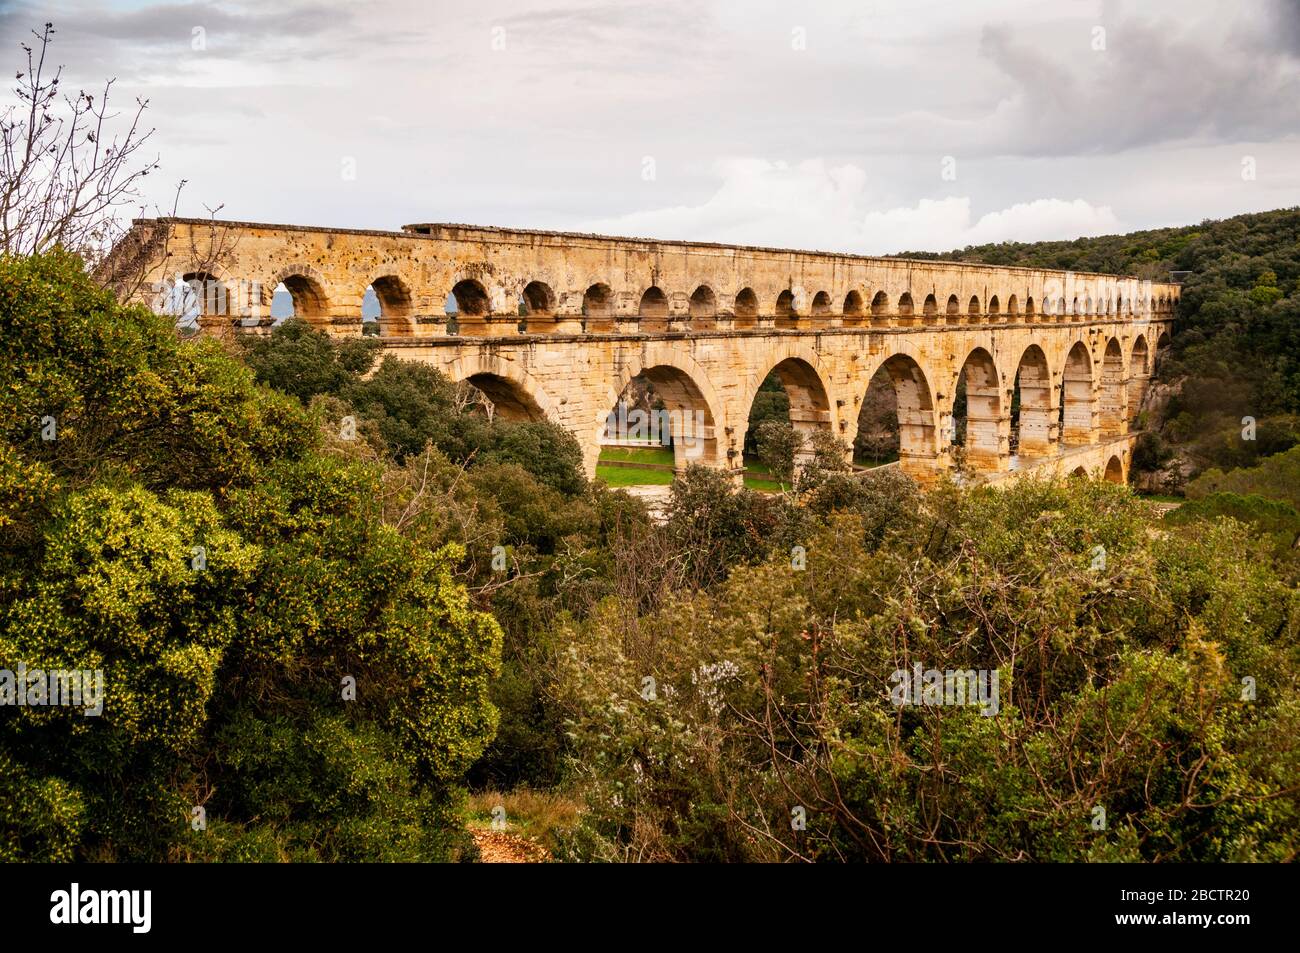 Pont du Gard ancient Roman three-tiered aqueduct used to carry water 31 miles to Nîmes, France. Stock Photo